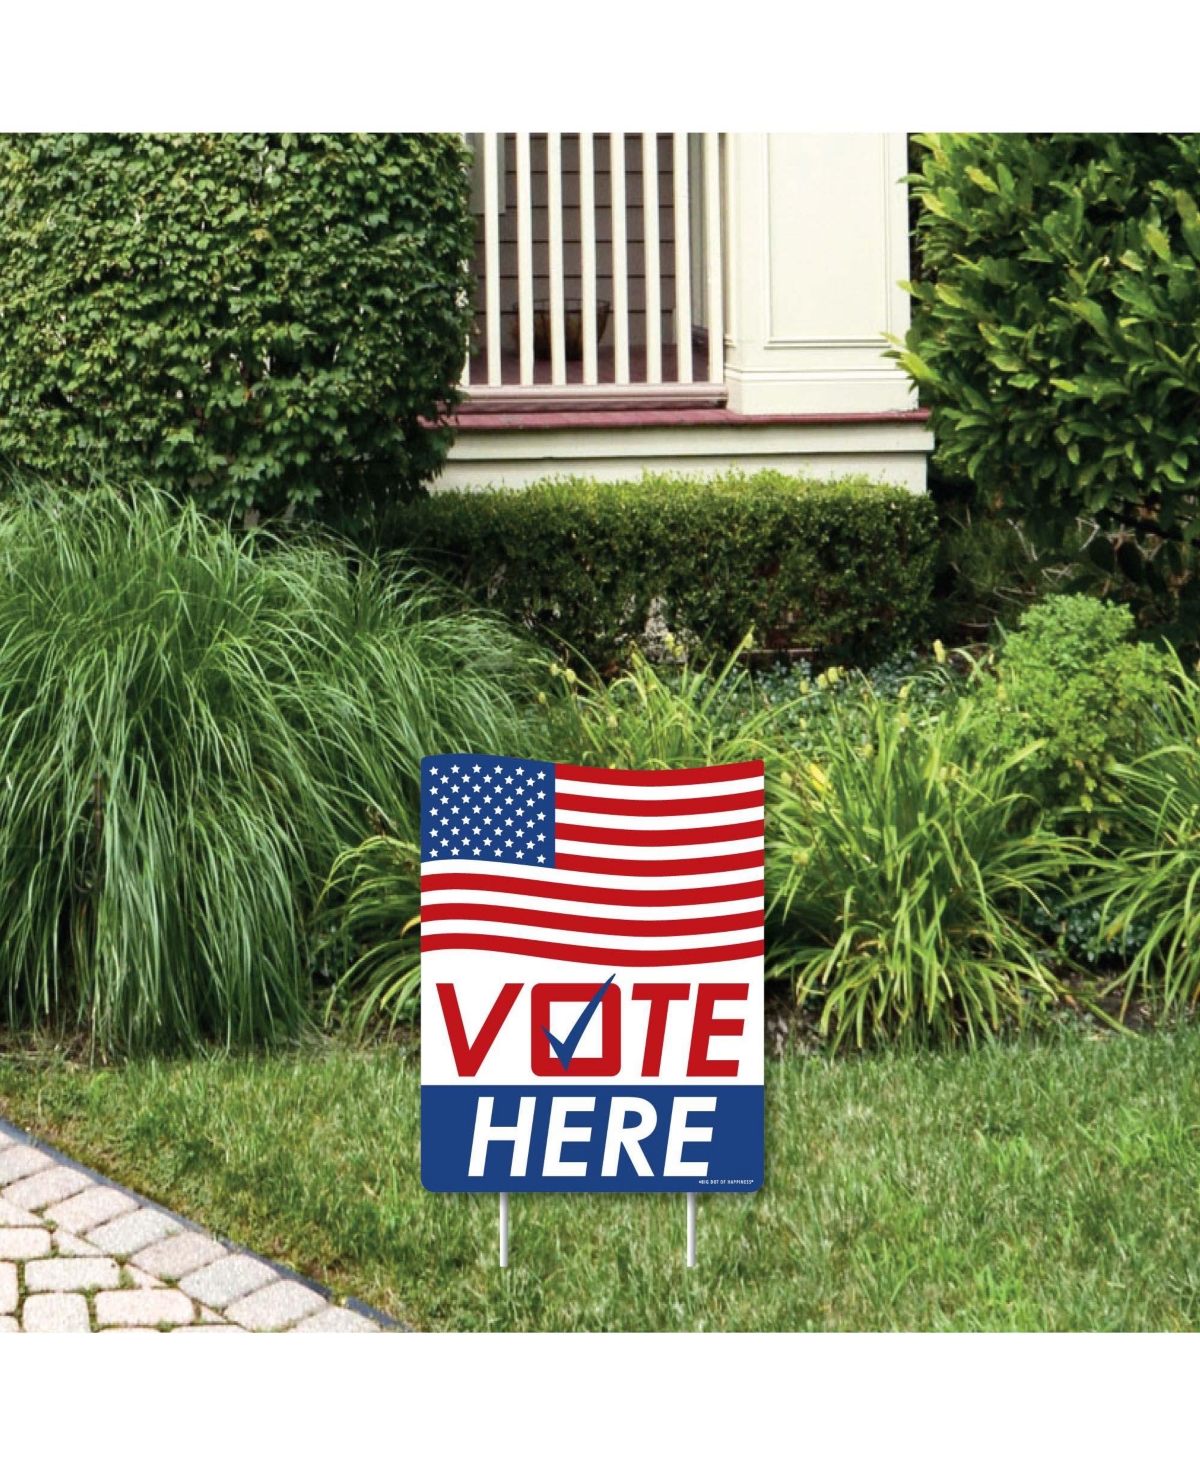 Vote Here - Outdoor Lawn Sign - Political Election Day Yard Sign - 1 Piece